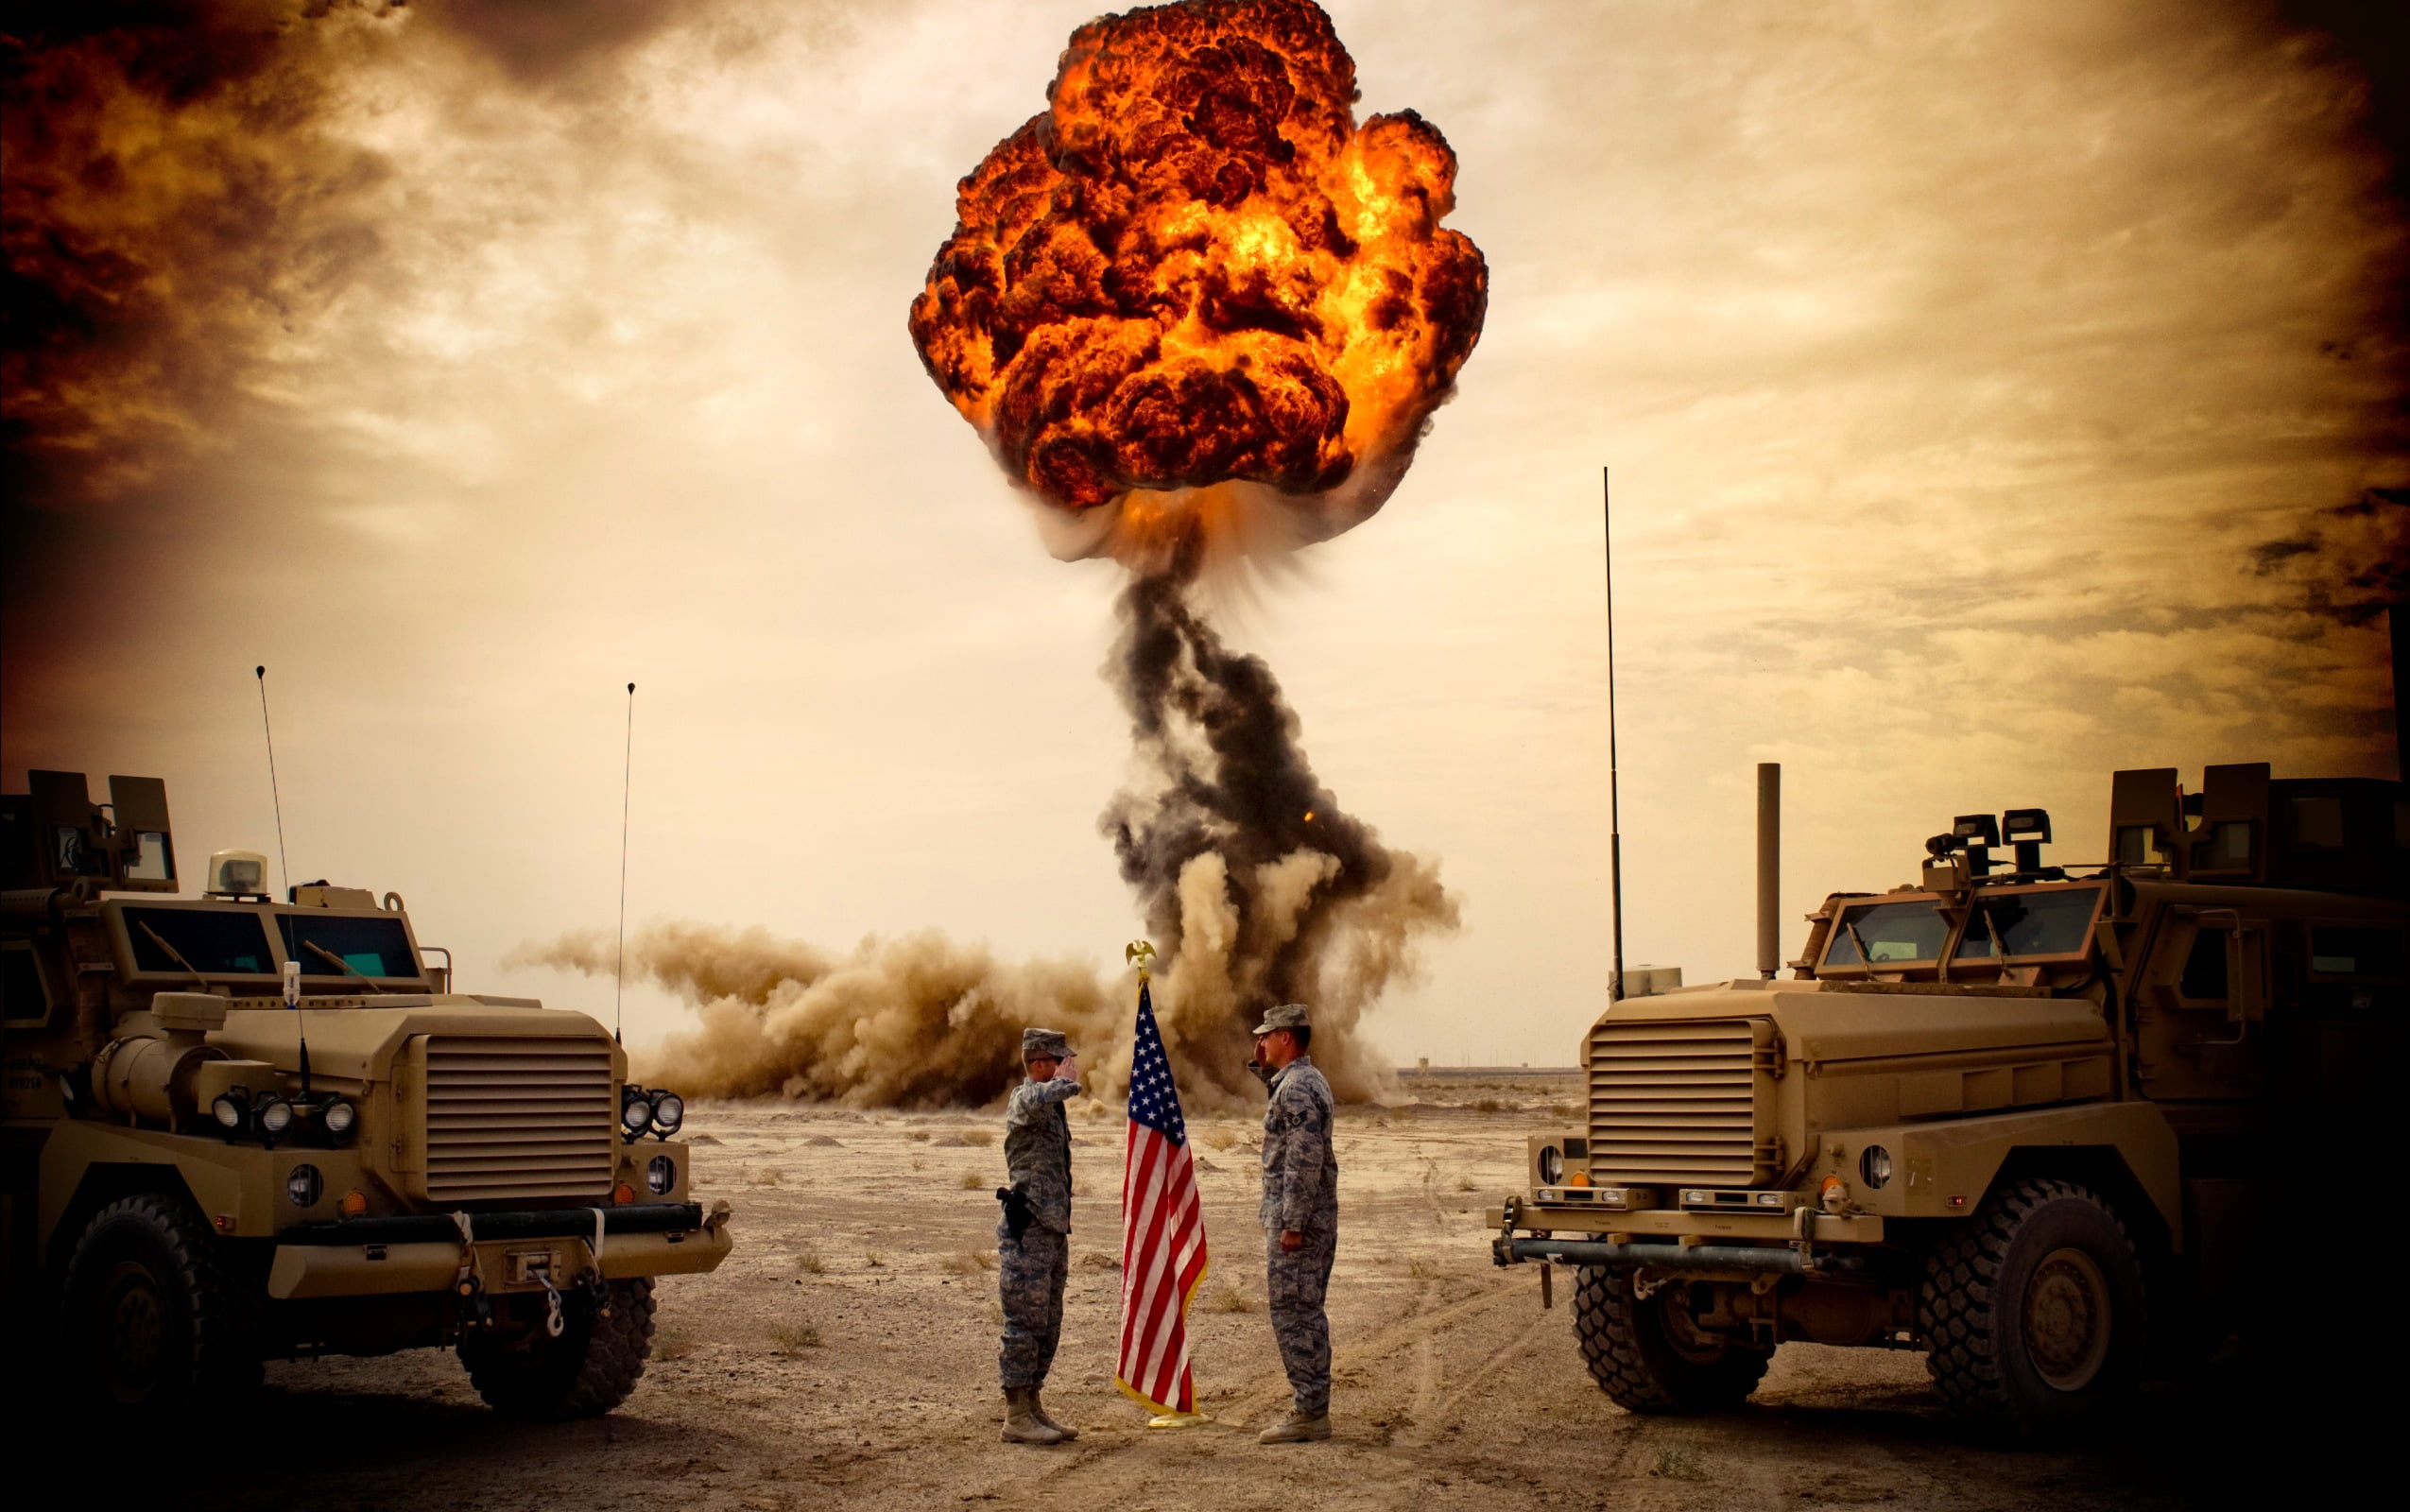 Enlistment, United States of America flag, War & Army, Explosion